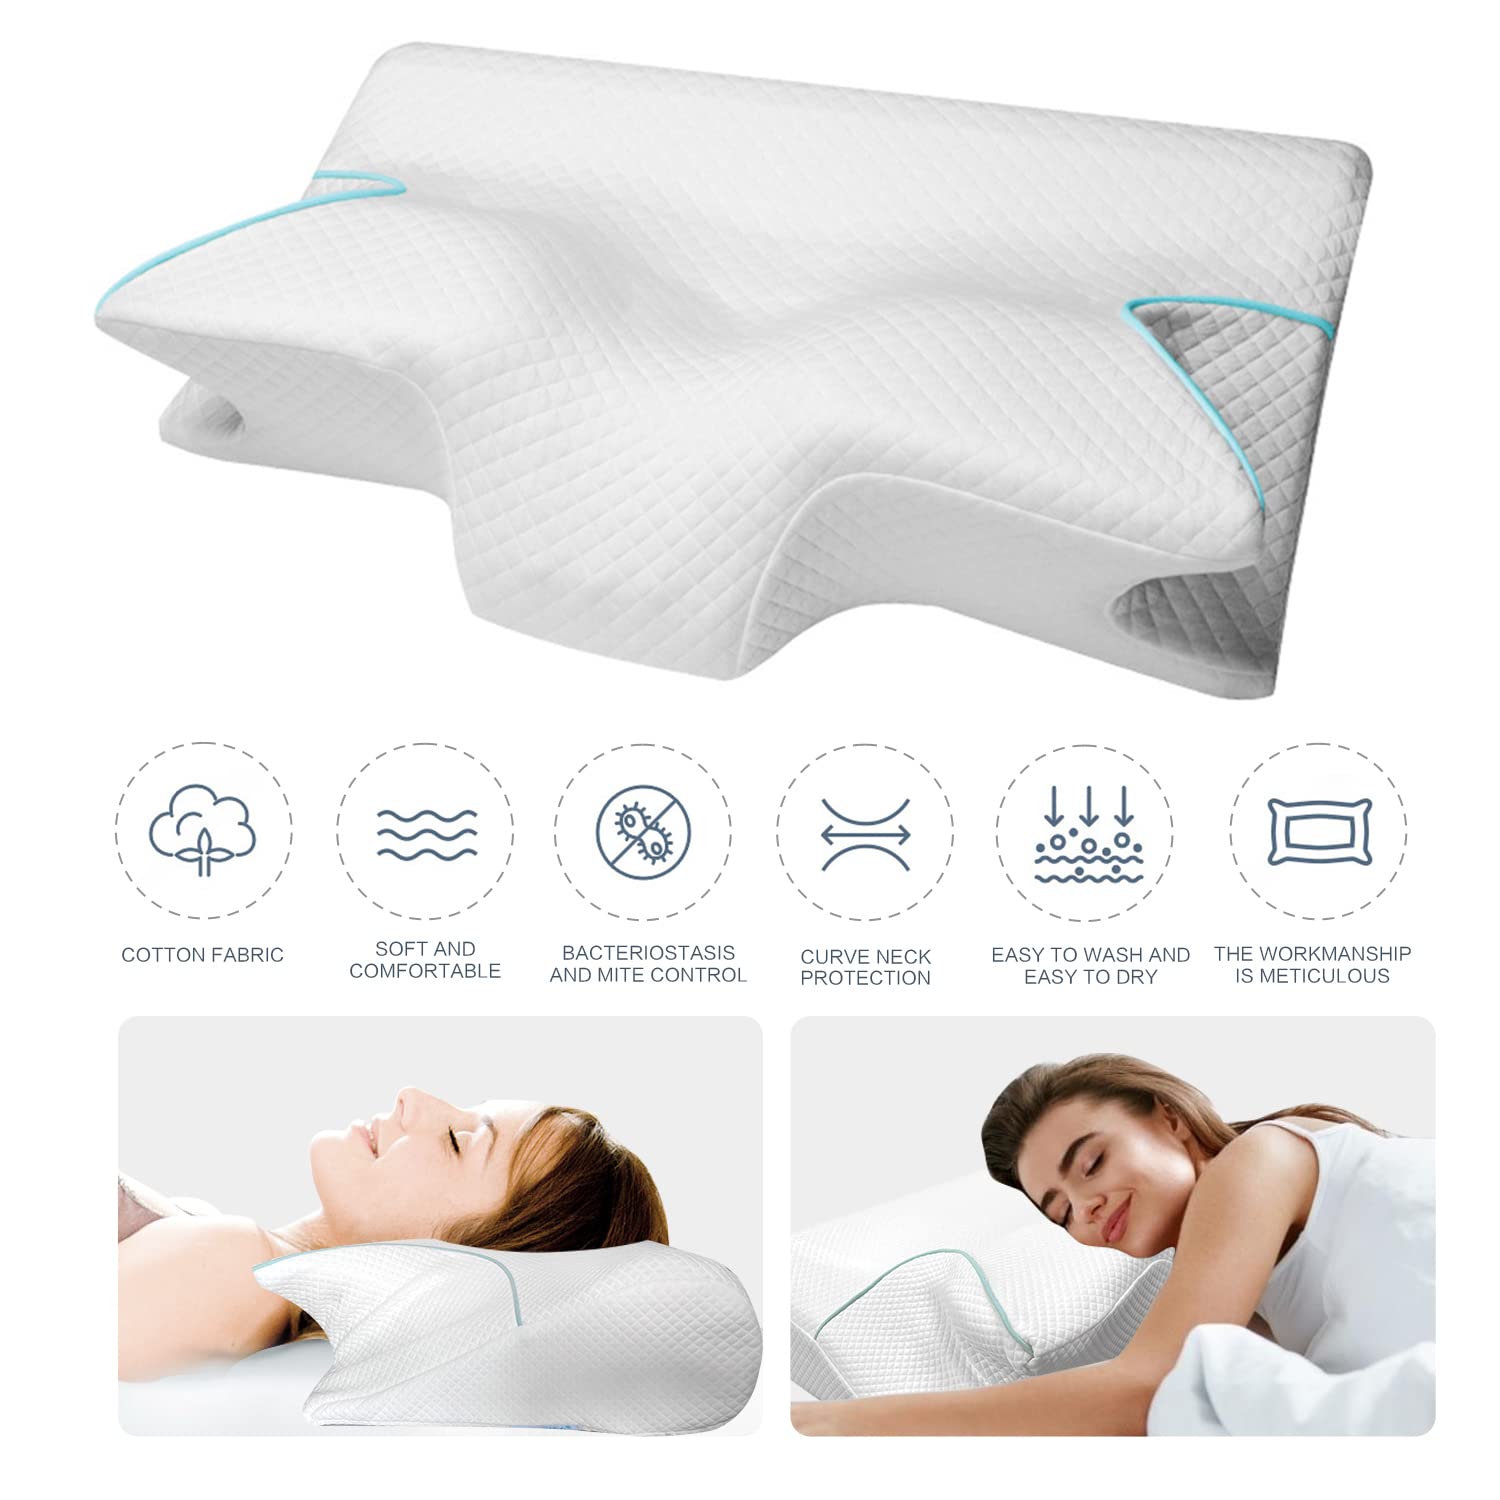 Great Choice Products Cervical-Shoulder Pain Pillow With Cooling Case, Hollow Design Odorless Memory Foam Orthopedic Bed Pillow For Sleeping, …